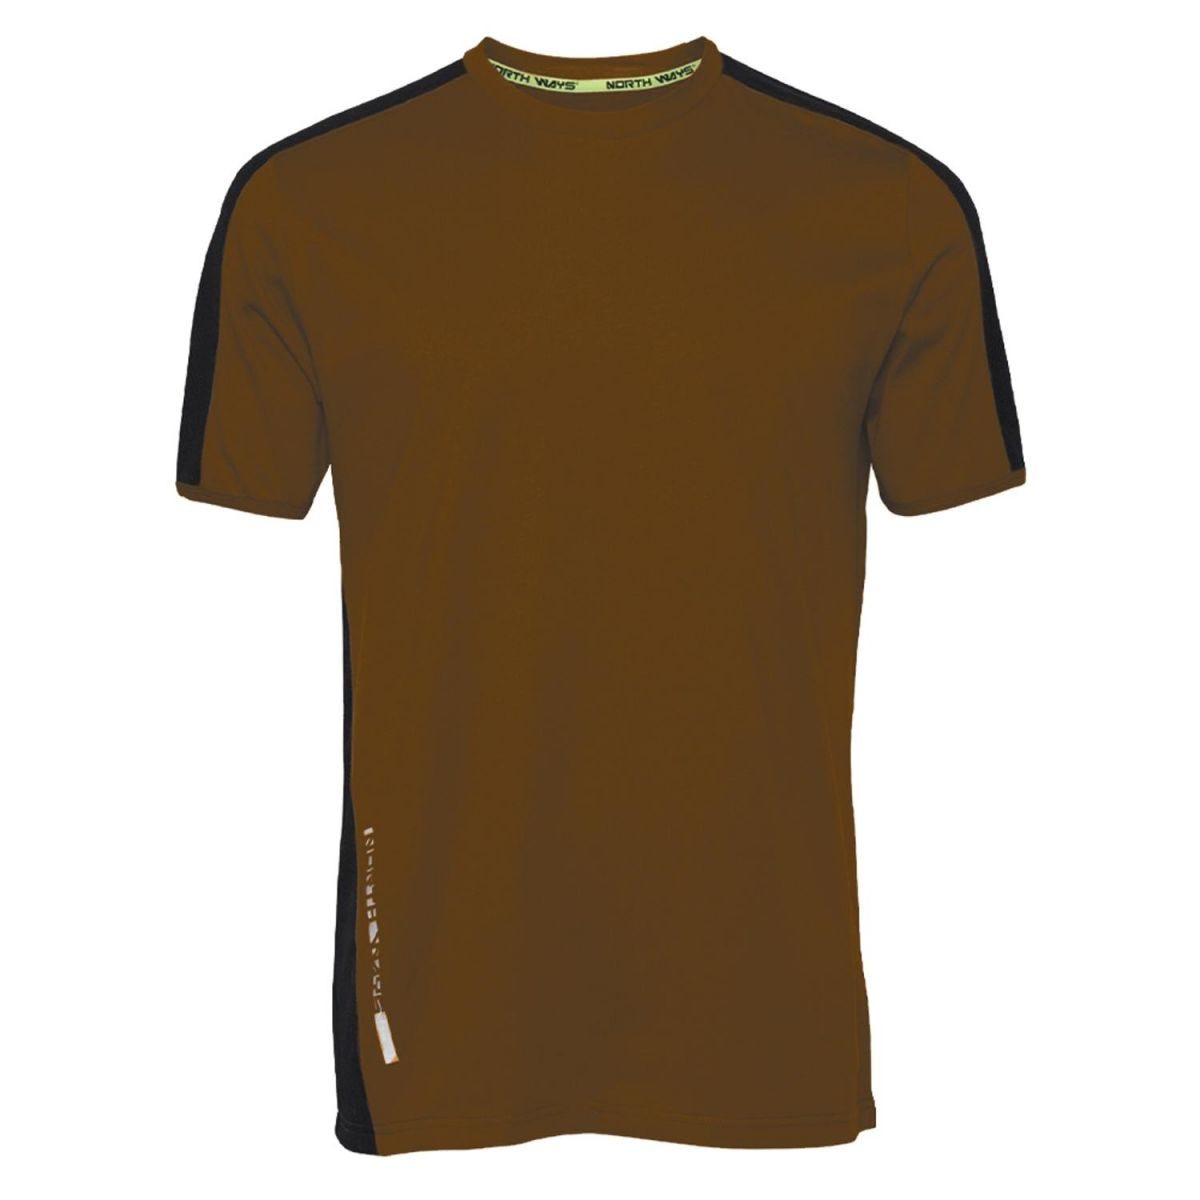 Tee-shirt à manches courtes pour homme Andy camel - North Ways - Taille S 0